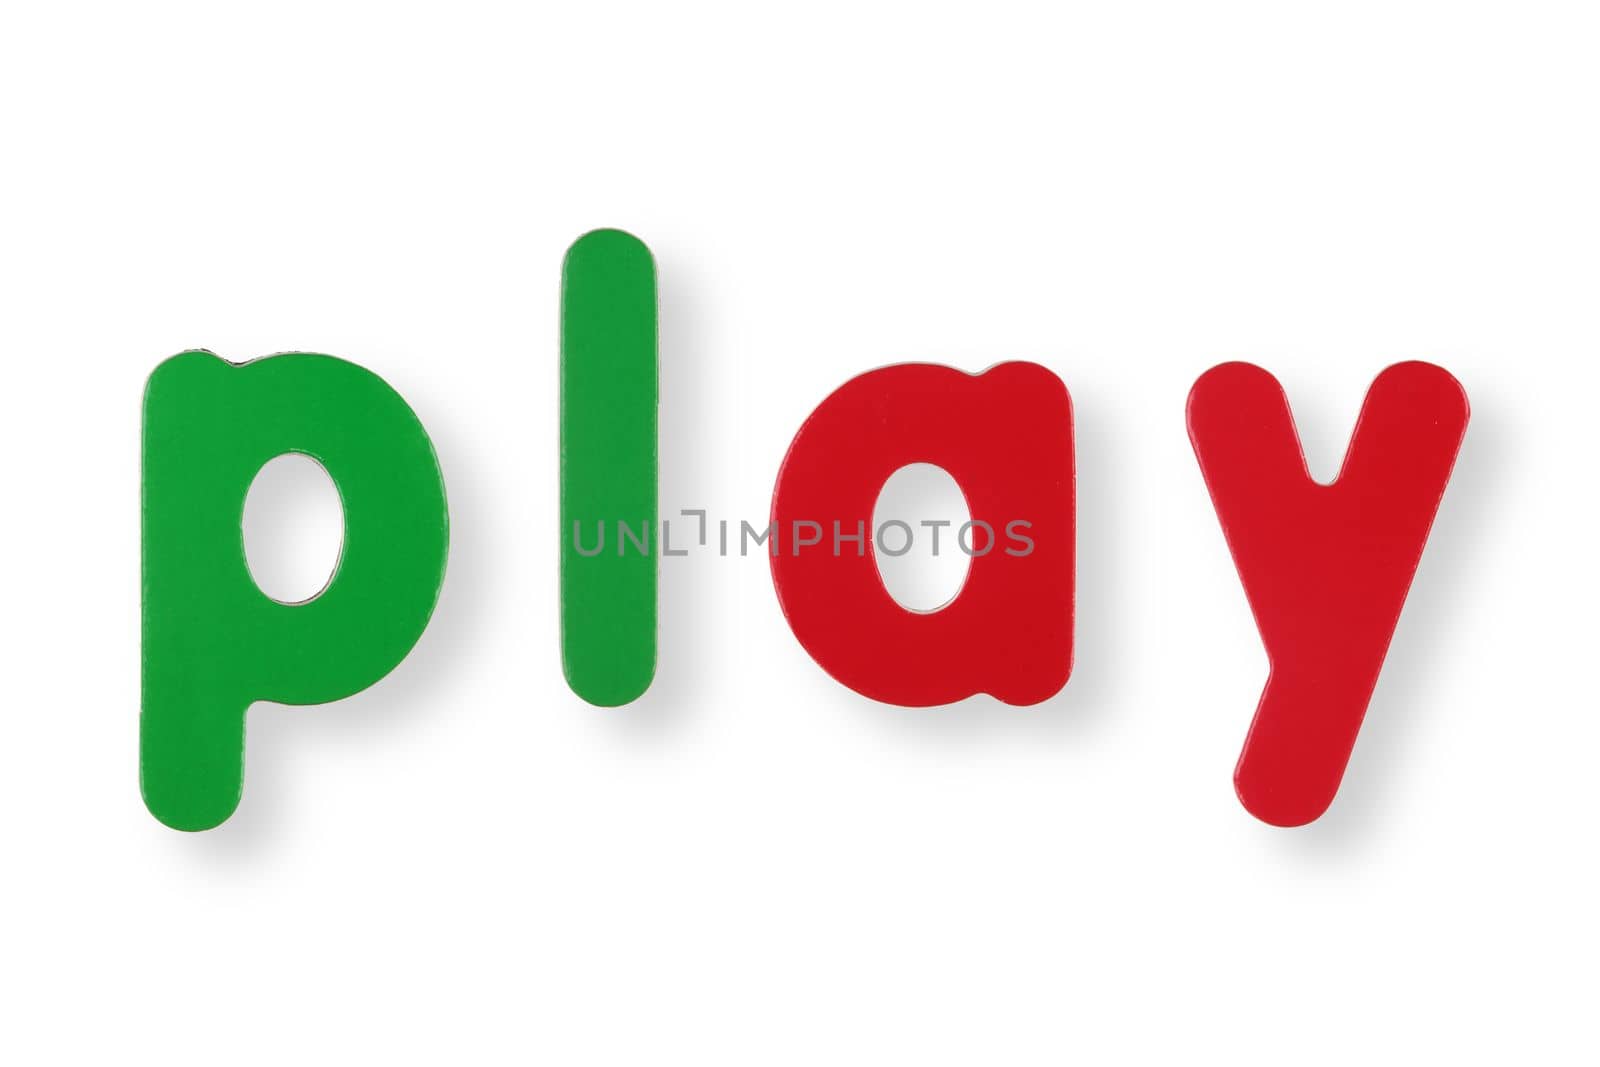 Play coloured magnetic letters on white with clipping path to remove shadow